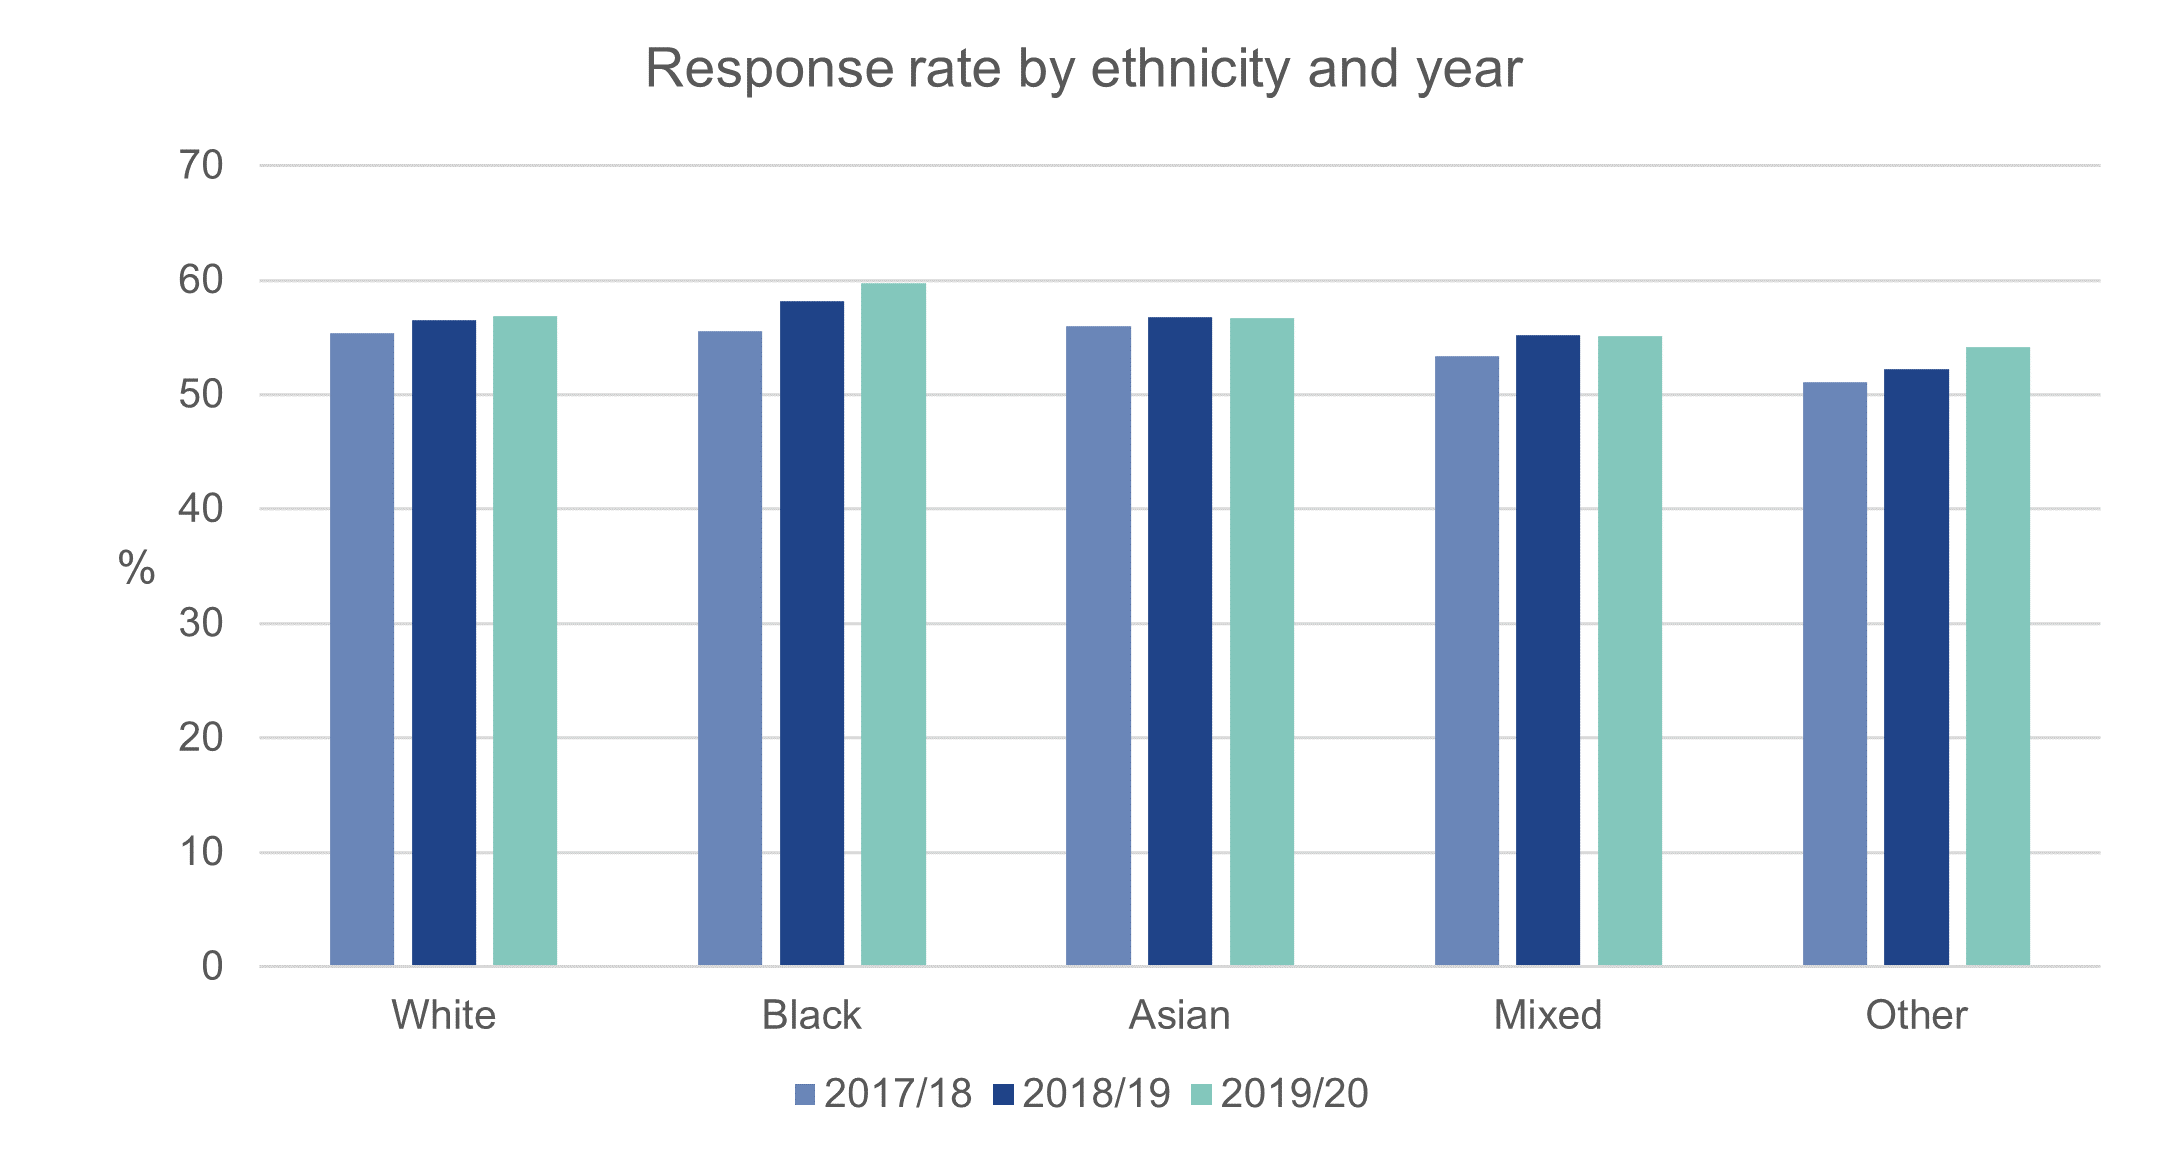 Response rates increased annually among Black and White graduates, with little change for other ethnicities